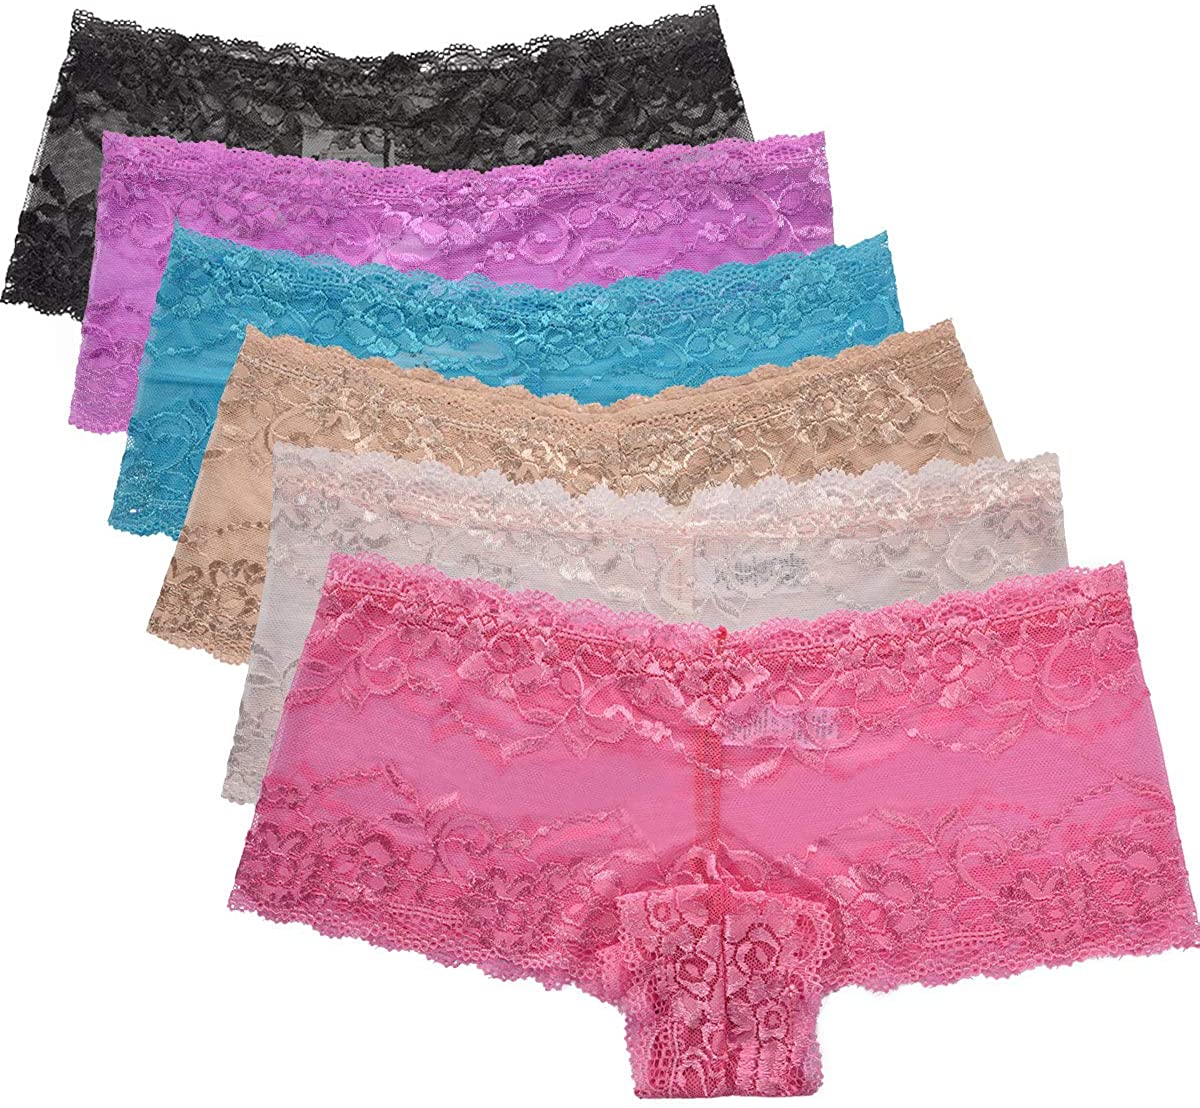 Price:$10.00 Gefyvuxrm Plus Size Lace Boyshorts Underwear for Women Panties Sexy Lingerie Cheeky 6 Pack at Amazon Women’s Clothing store